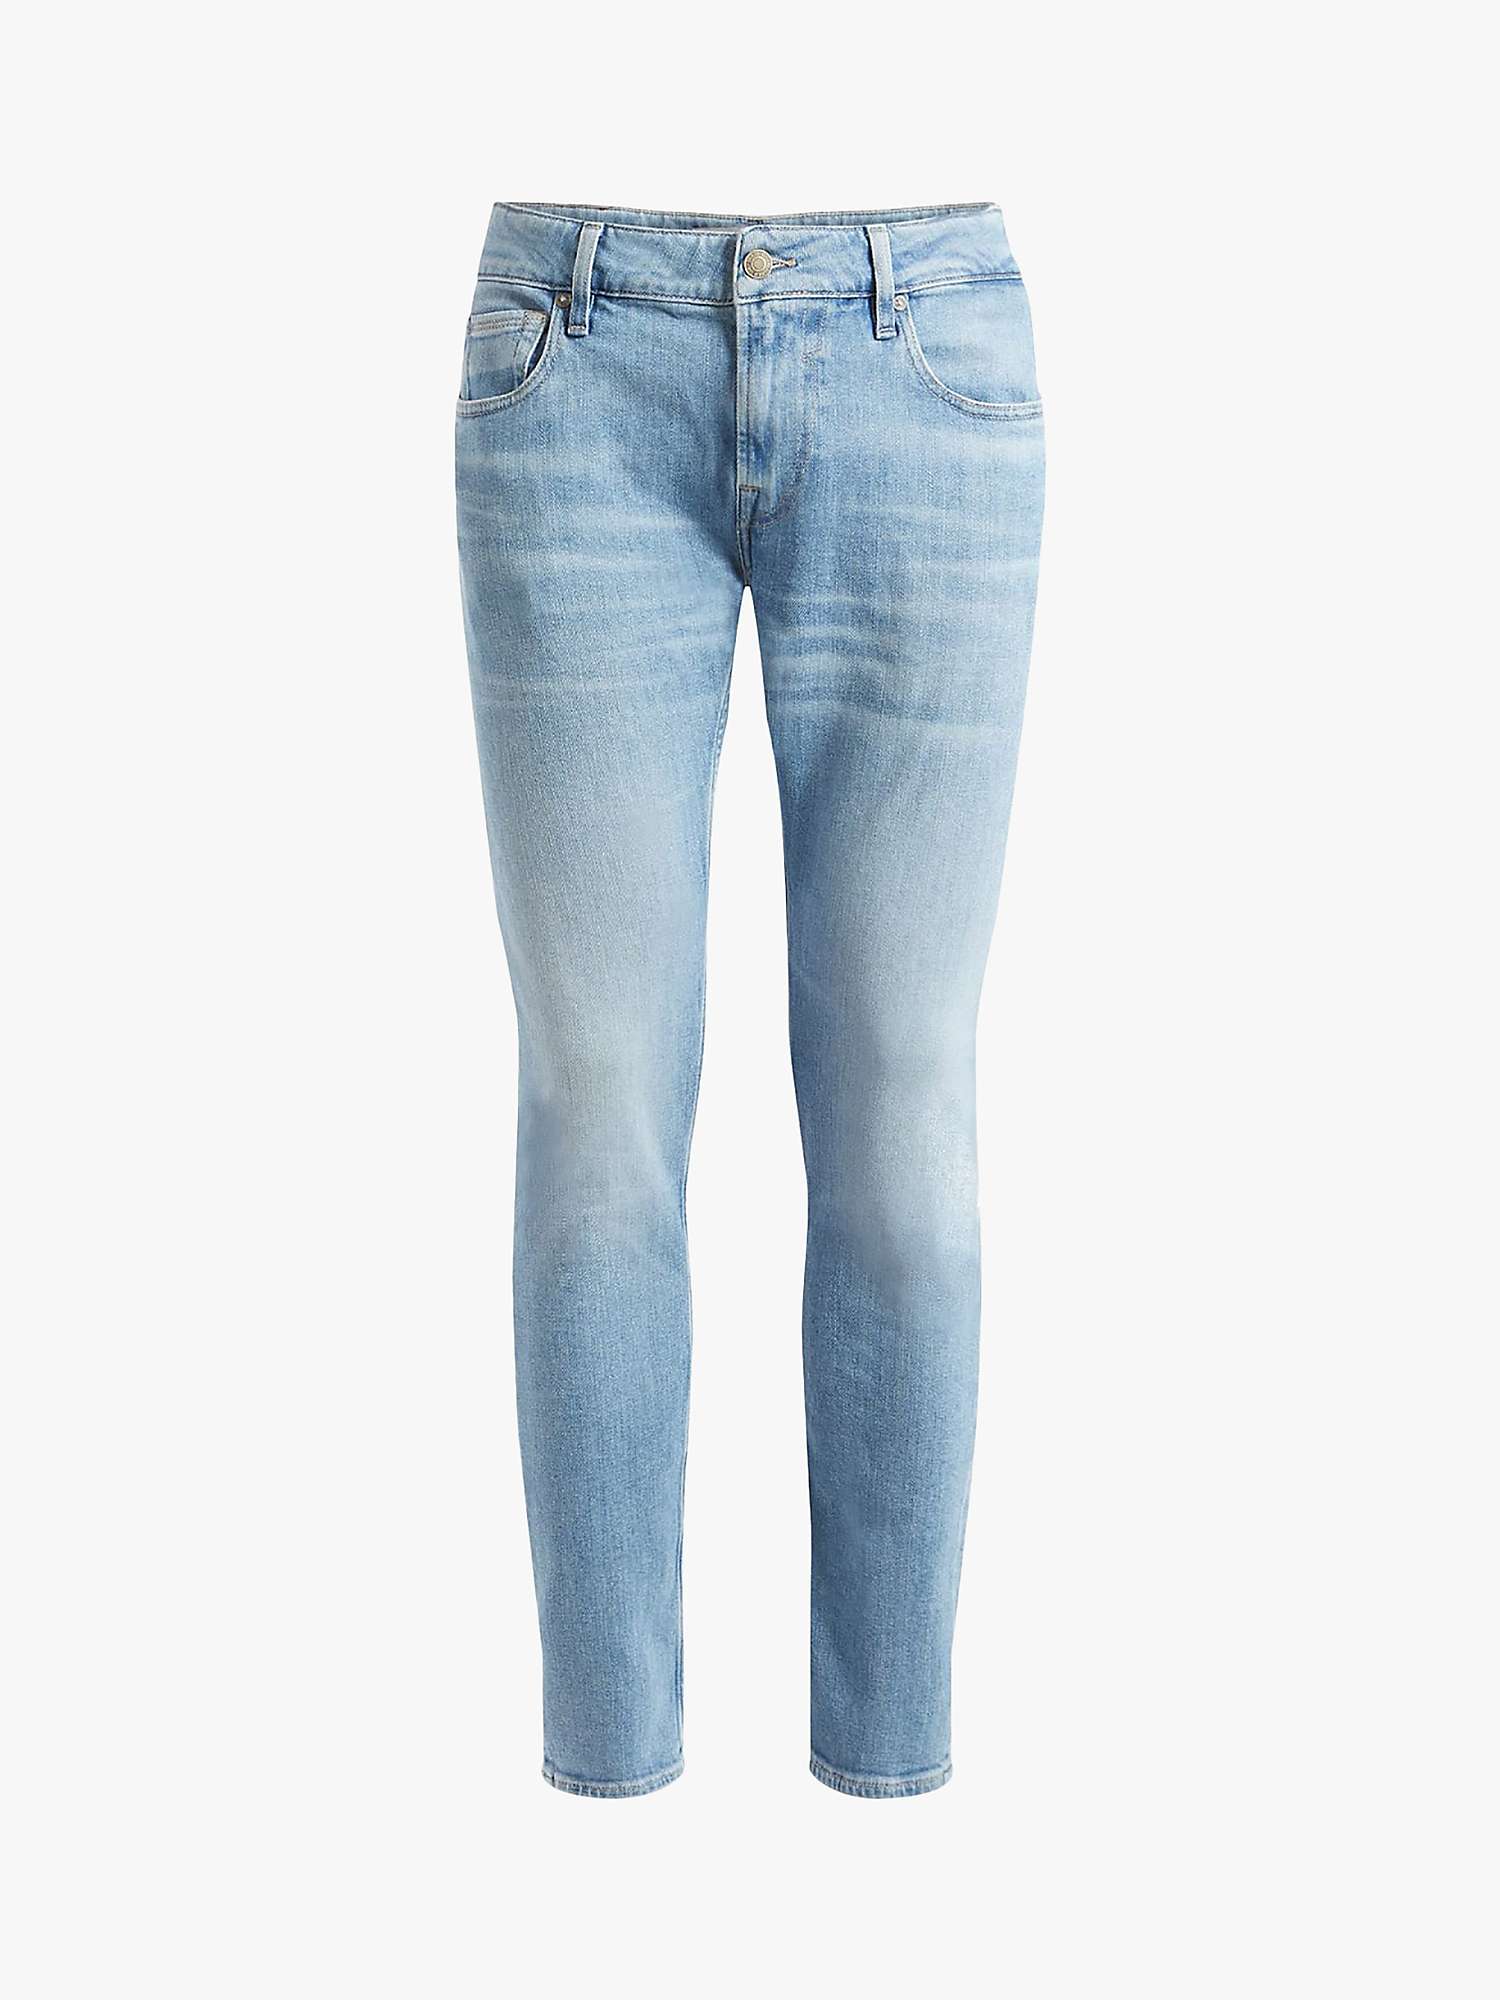 Buy GUESS Miami Skinny Fit Jeans, Carry Light Online at johnlewis.com